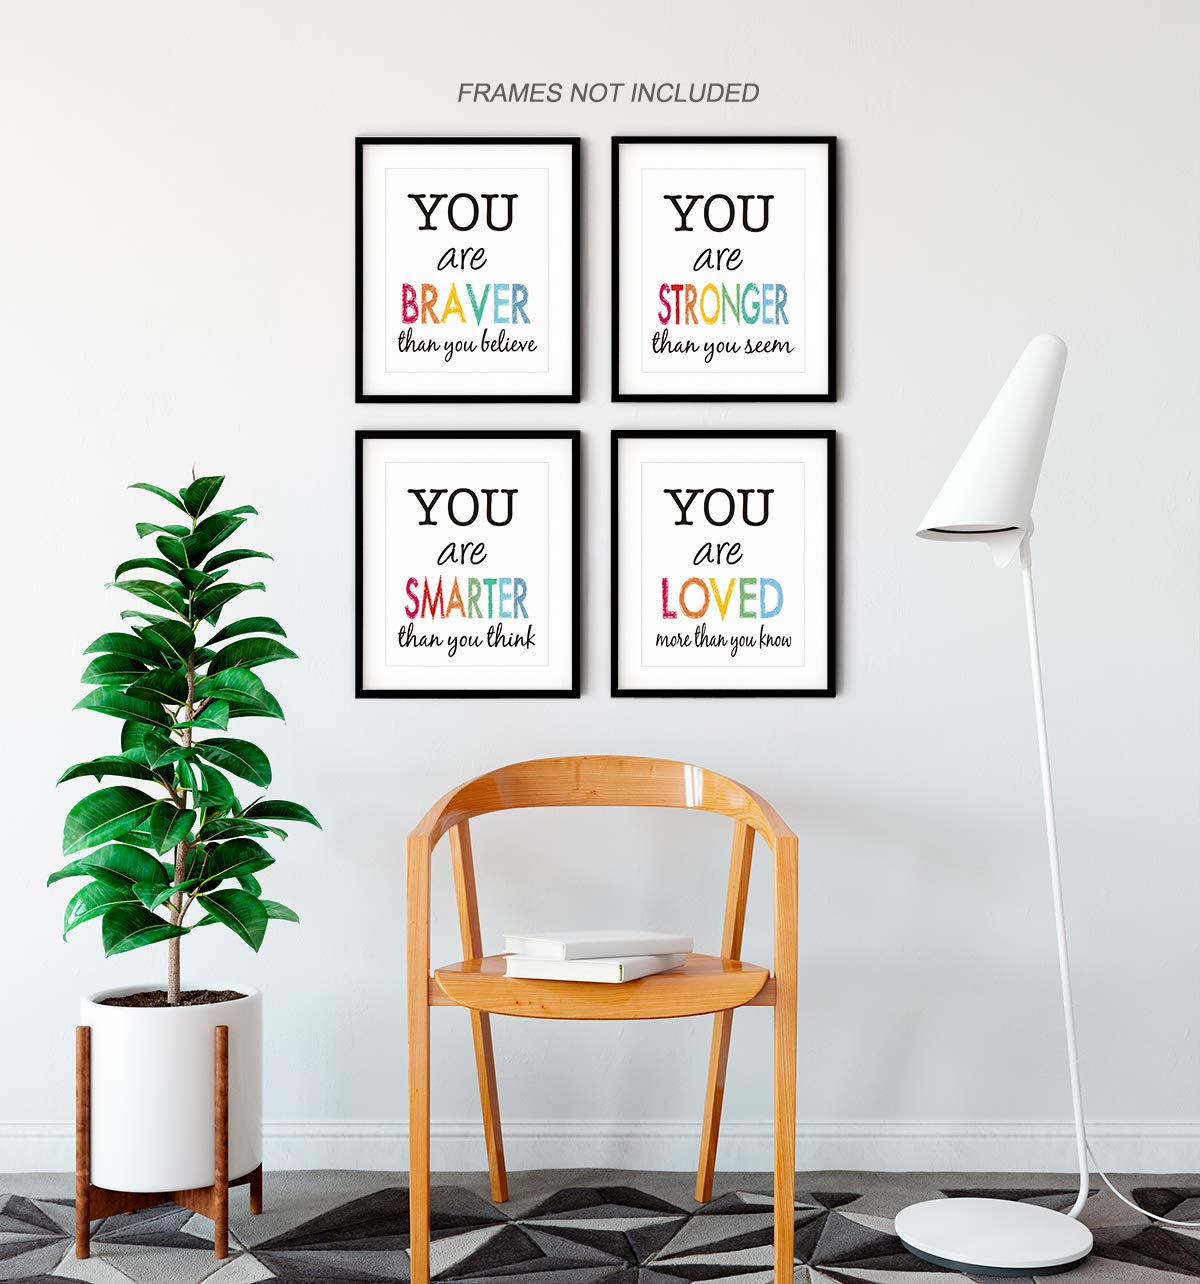 XWELLDAN Motivational Quotes Wall Art Colorful Prints, Inspirational Poster for Home Office Bedroom Classroom Decor, 8 x 10 Inch Set of 4 Prints, No Frame